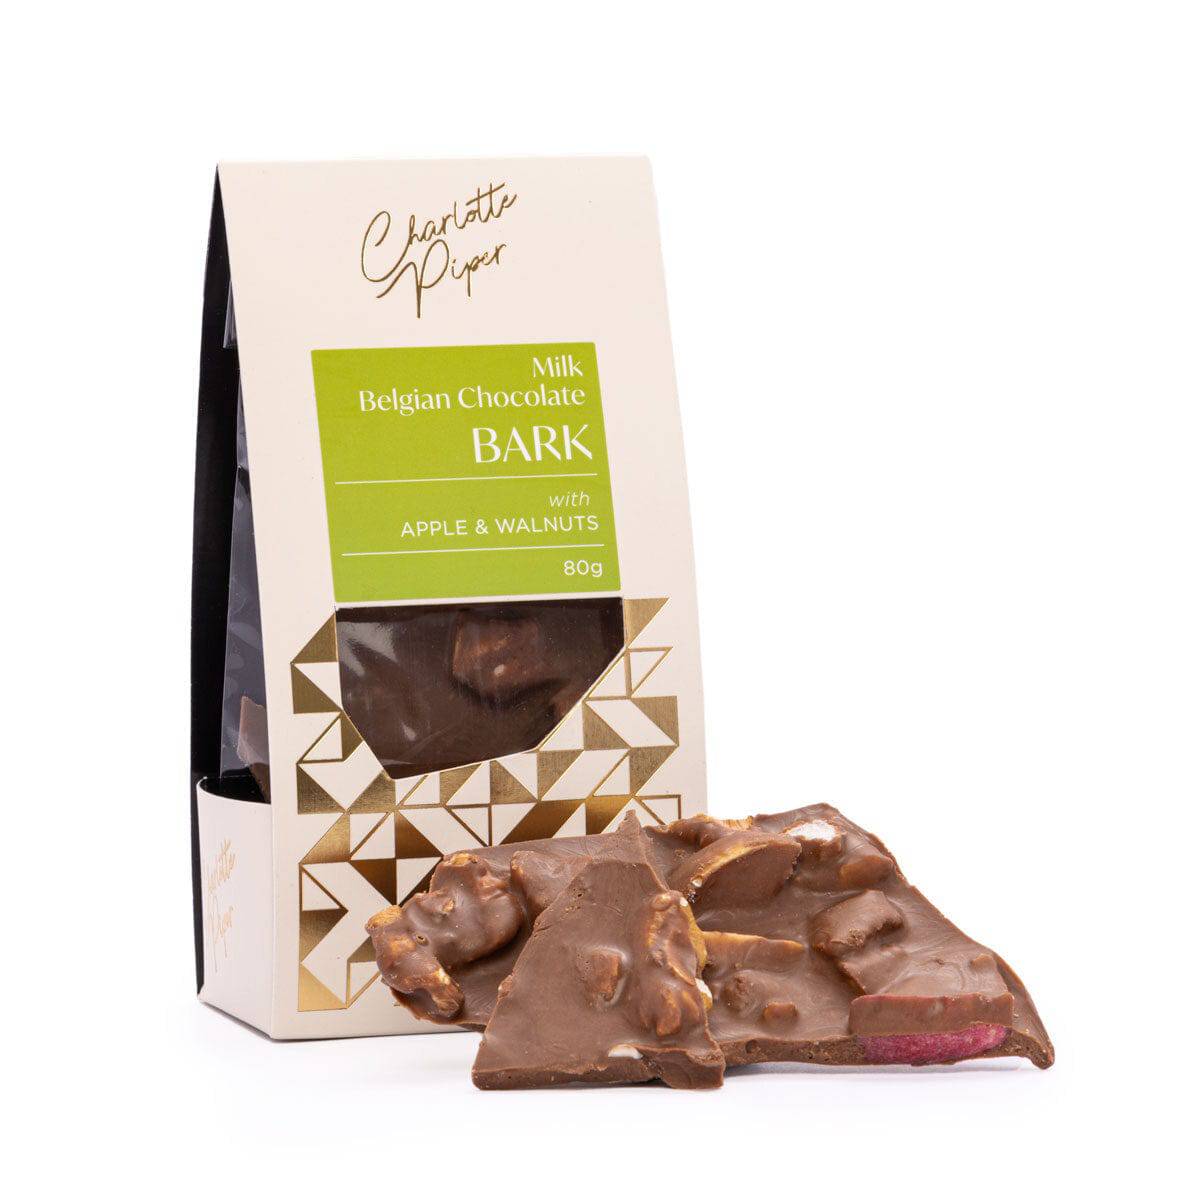 BLOOMHAUS MELBOURNE Milk Belgian Chocolate Bark with Apple and Walnut Charlotte Piper Chocolate Bark